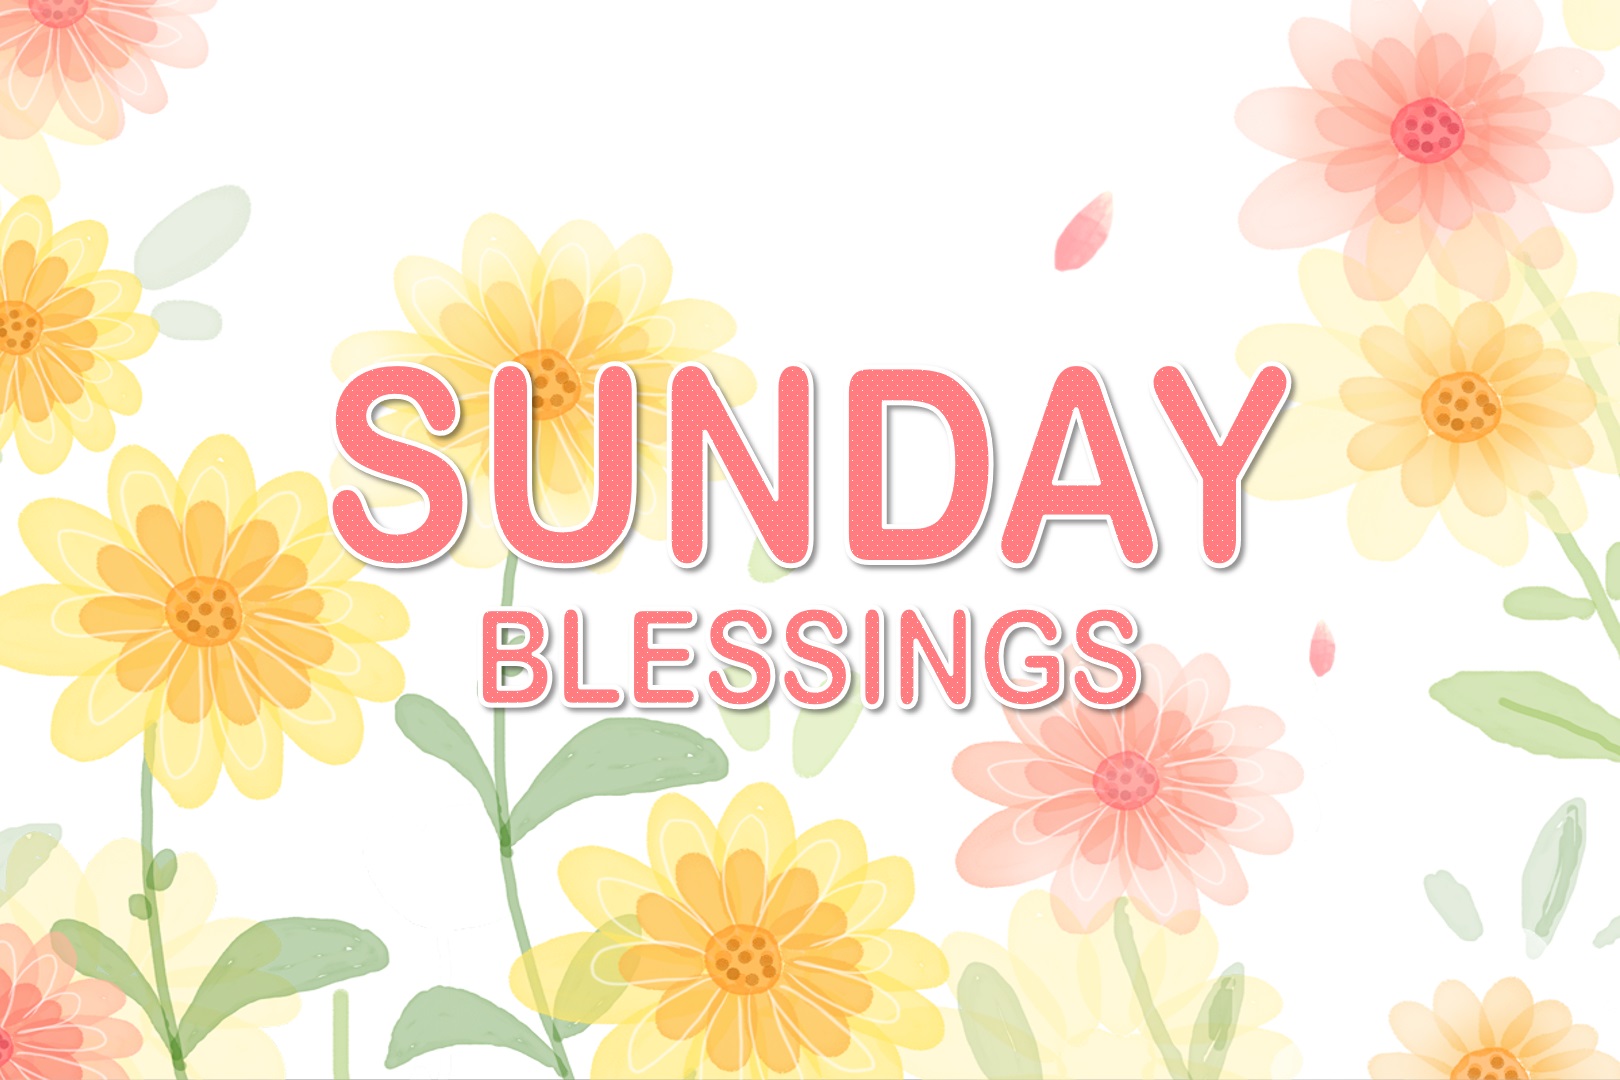 Best Sunday Blessings Quotes And Messages | SuperbWishes